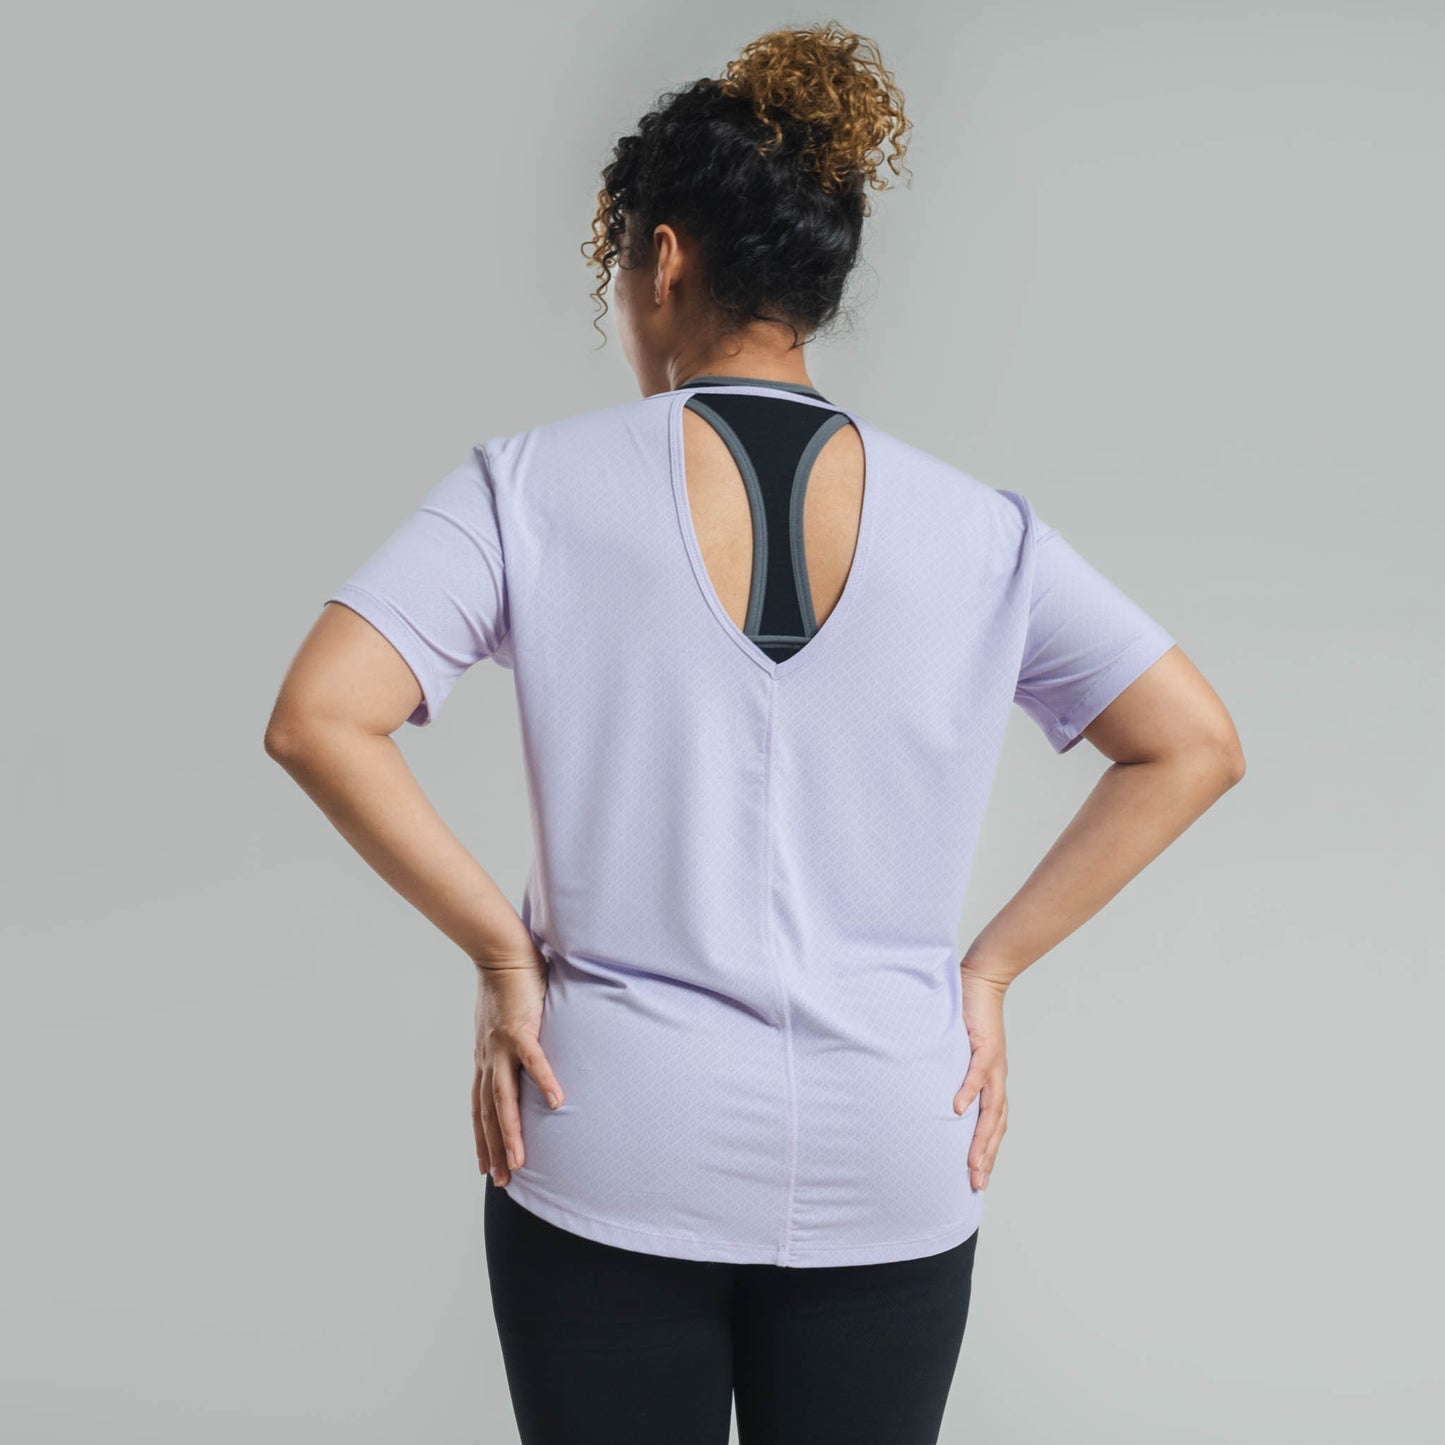 Open Back Yoga Top for Ladies